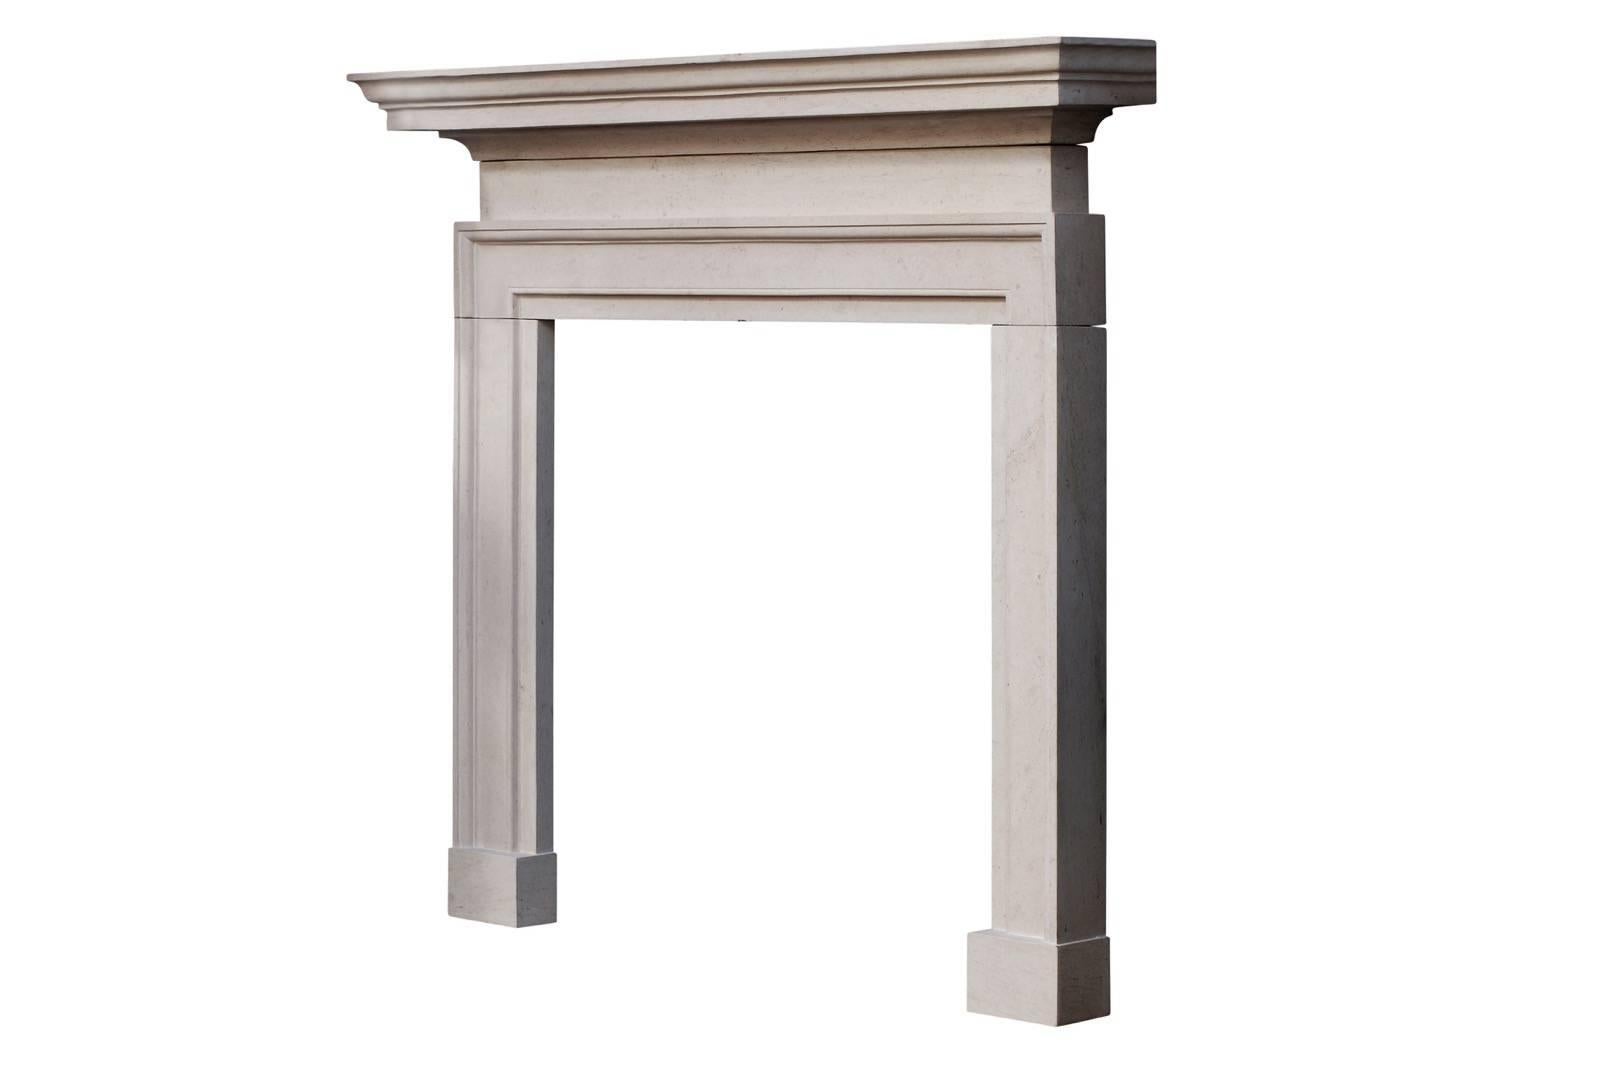 An simple limestone fireplace in the George II style in Ancaster stone. The moulded jambs surmounted by plain frieze and heavily moulded shelf. English, modern.

Measure: Shelf width 1524 mm 60 in
Overall height 1359 mm 53 ½ in
Opening height